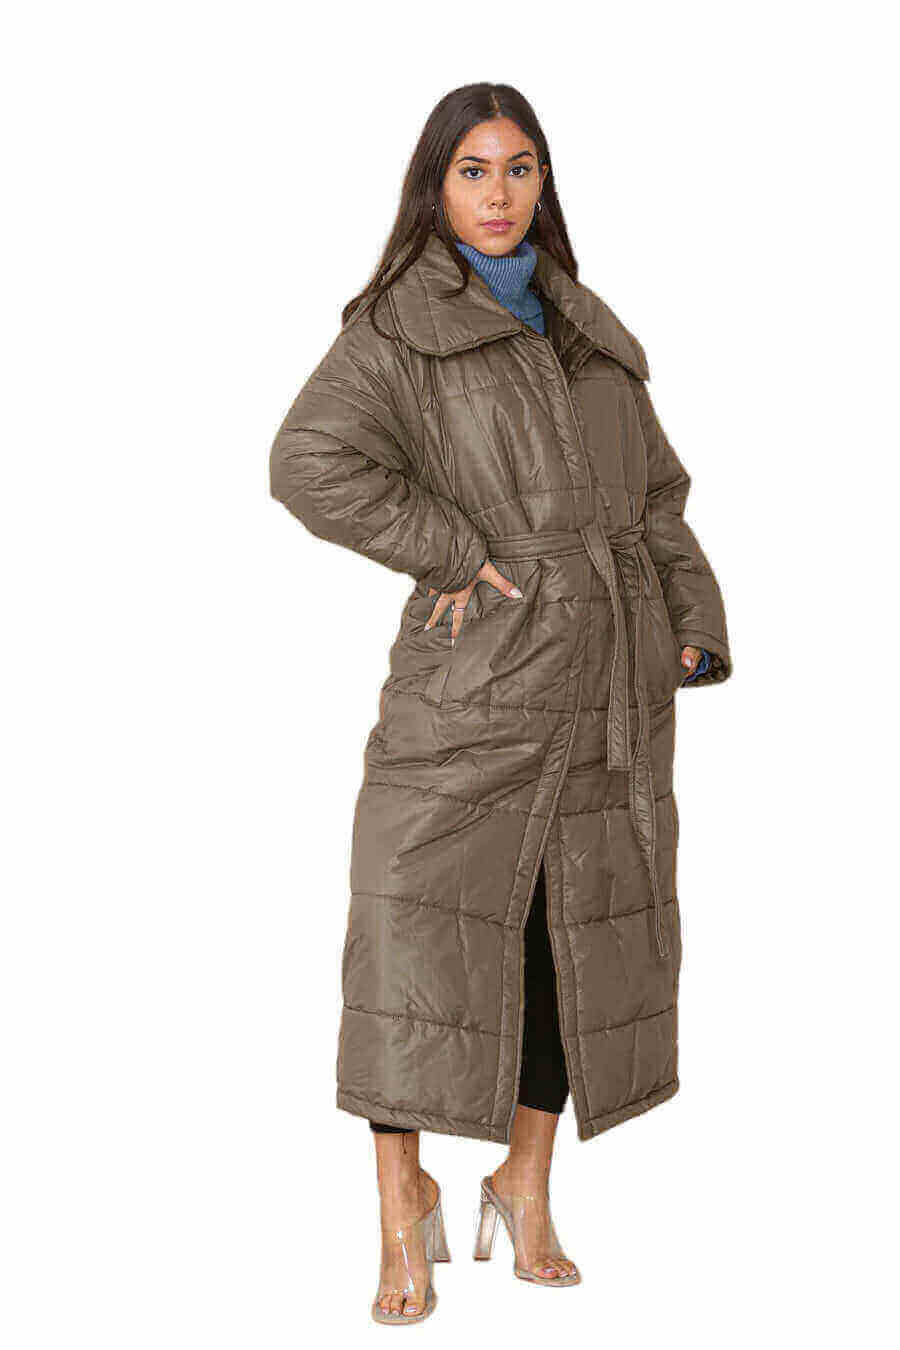 Side View of Chic Long Olive Puffer Coat for Womens